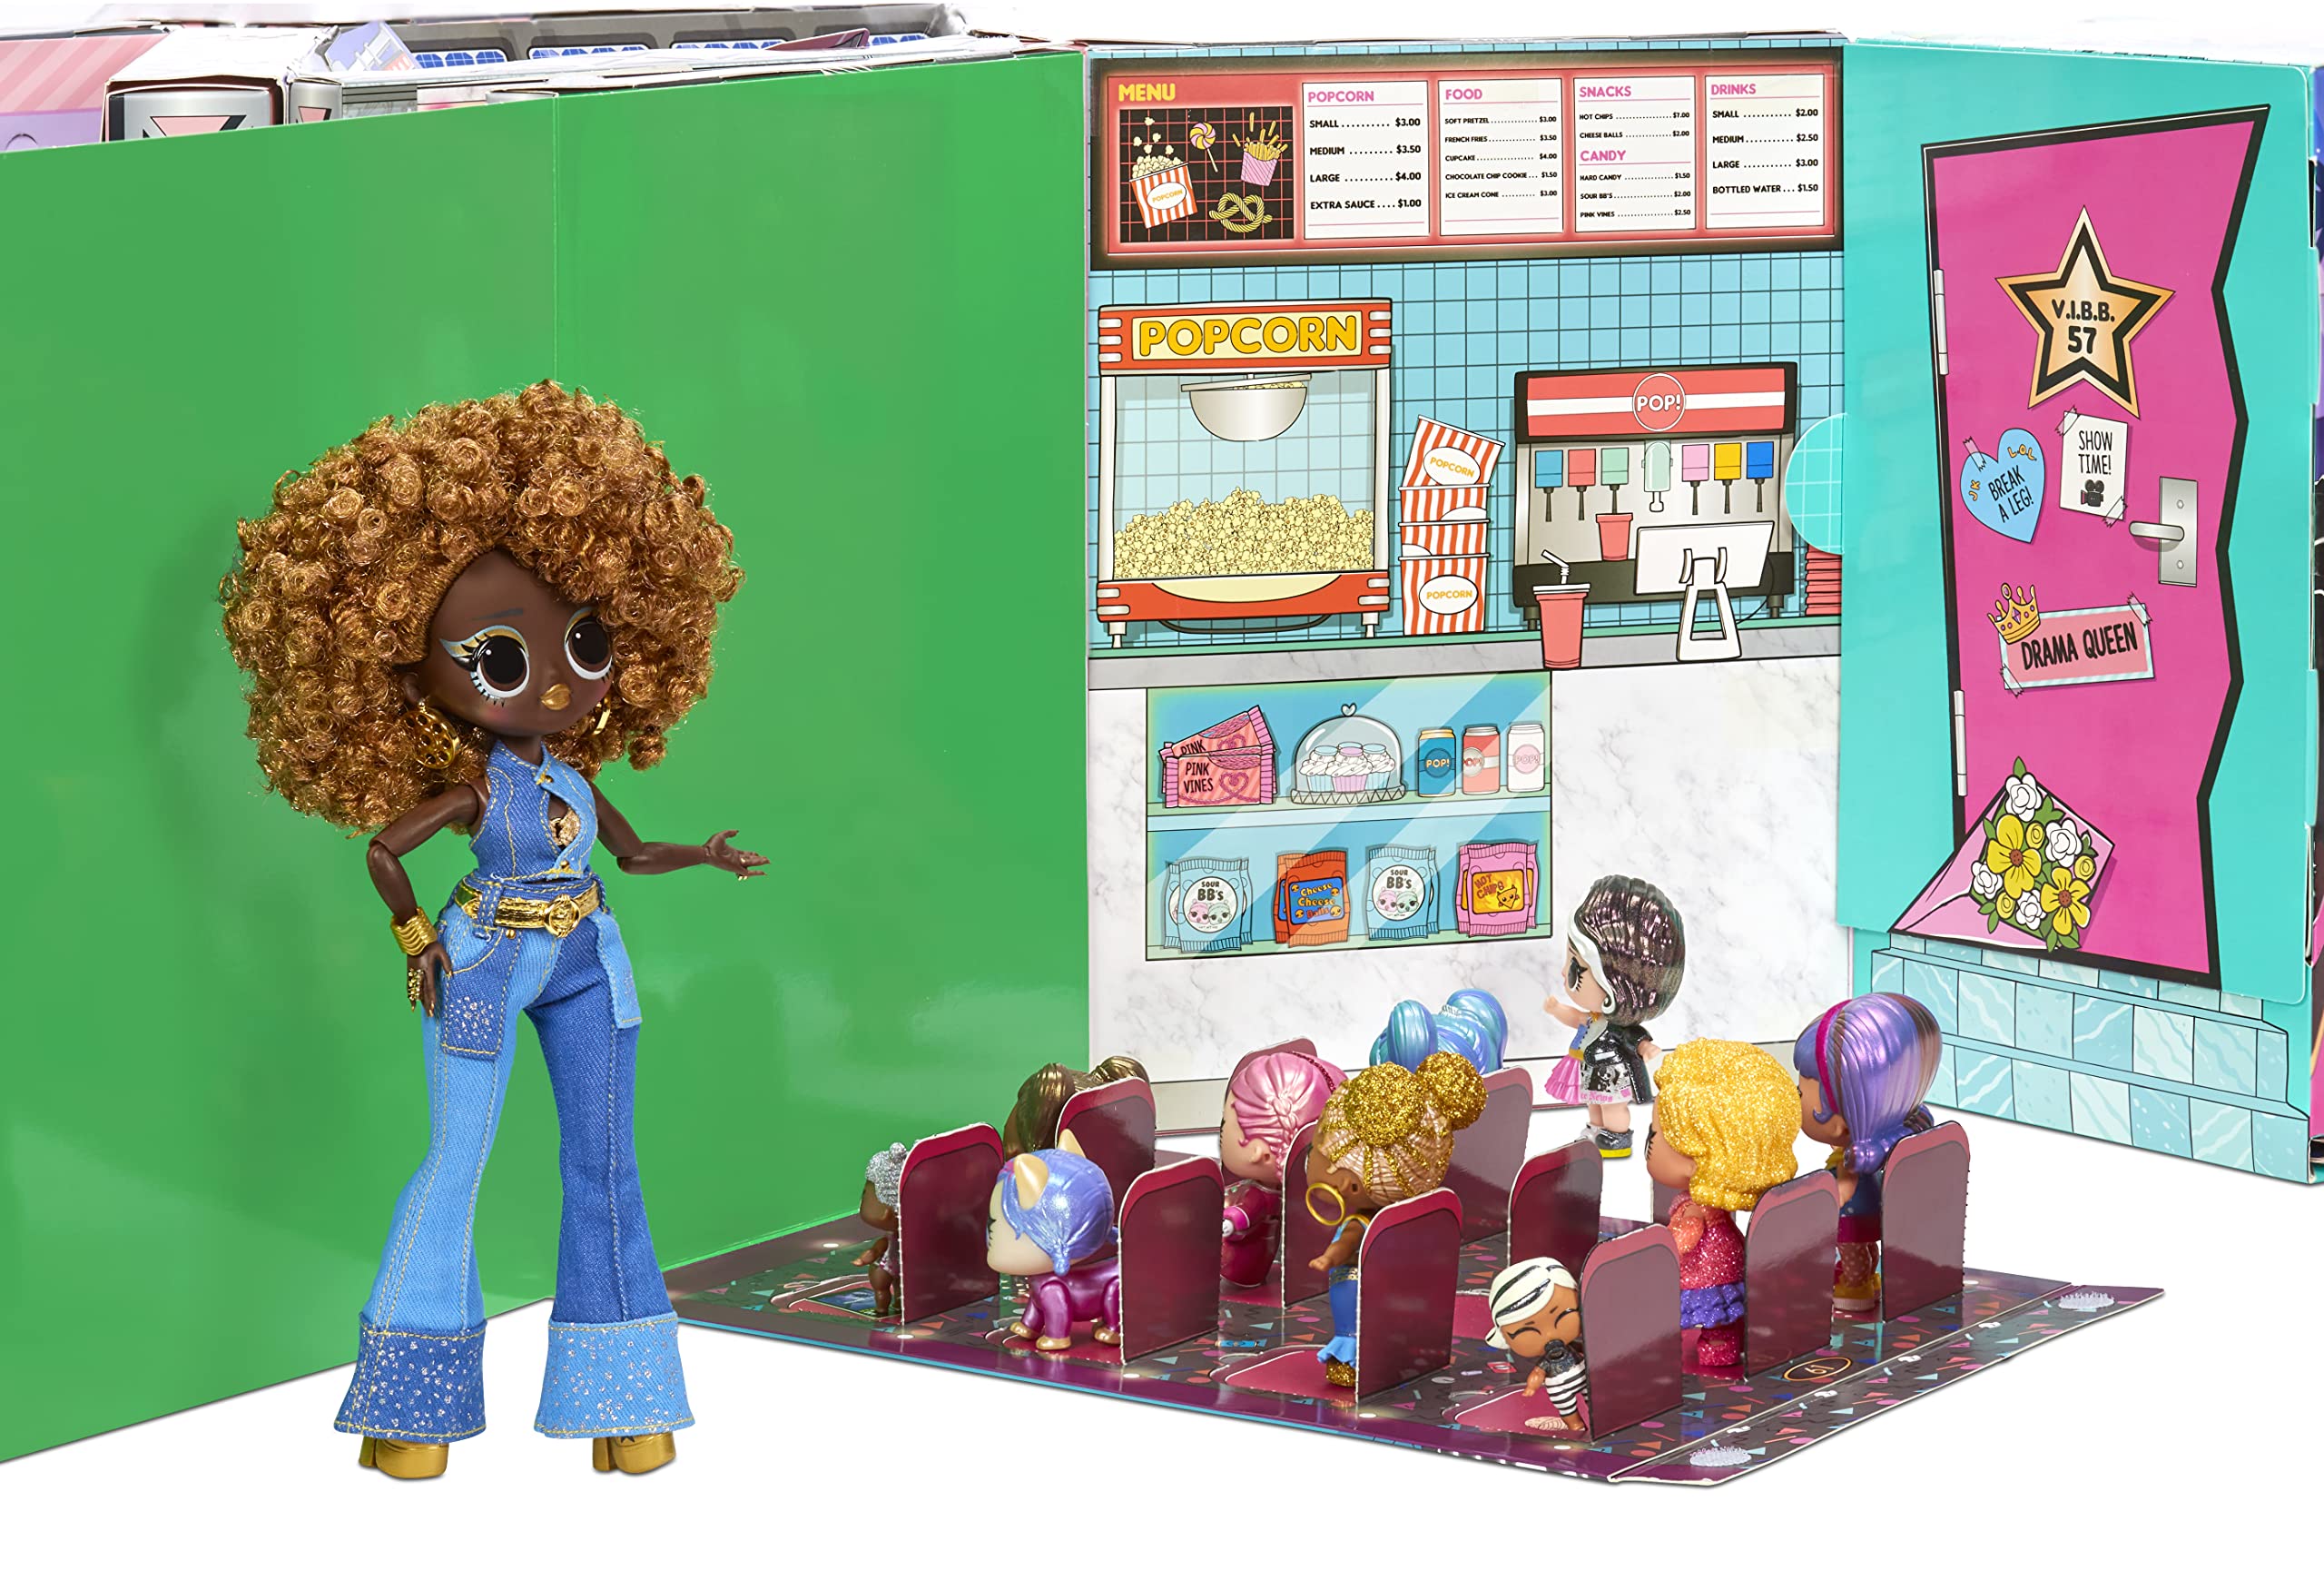 LOL Surprise OMG Movie Magic Studios with 70+ Surprises, 12 Dolls Including 2 Fashion Dolls, 4 Movie Studio Stages, Green Screen & Accessories- Gift Toy for Girls Boys Ages 4 5 6 7+ Years